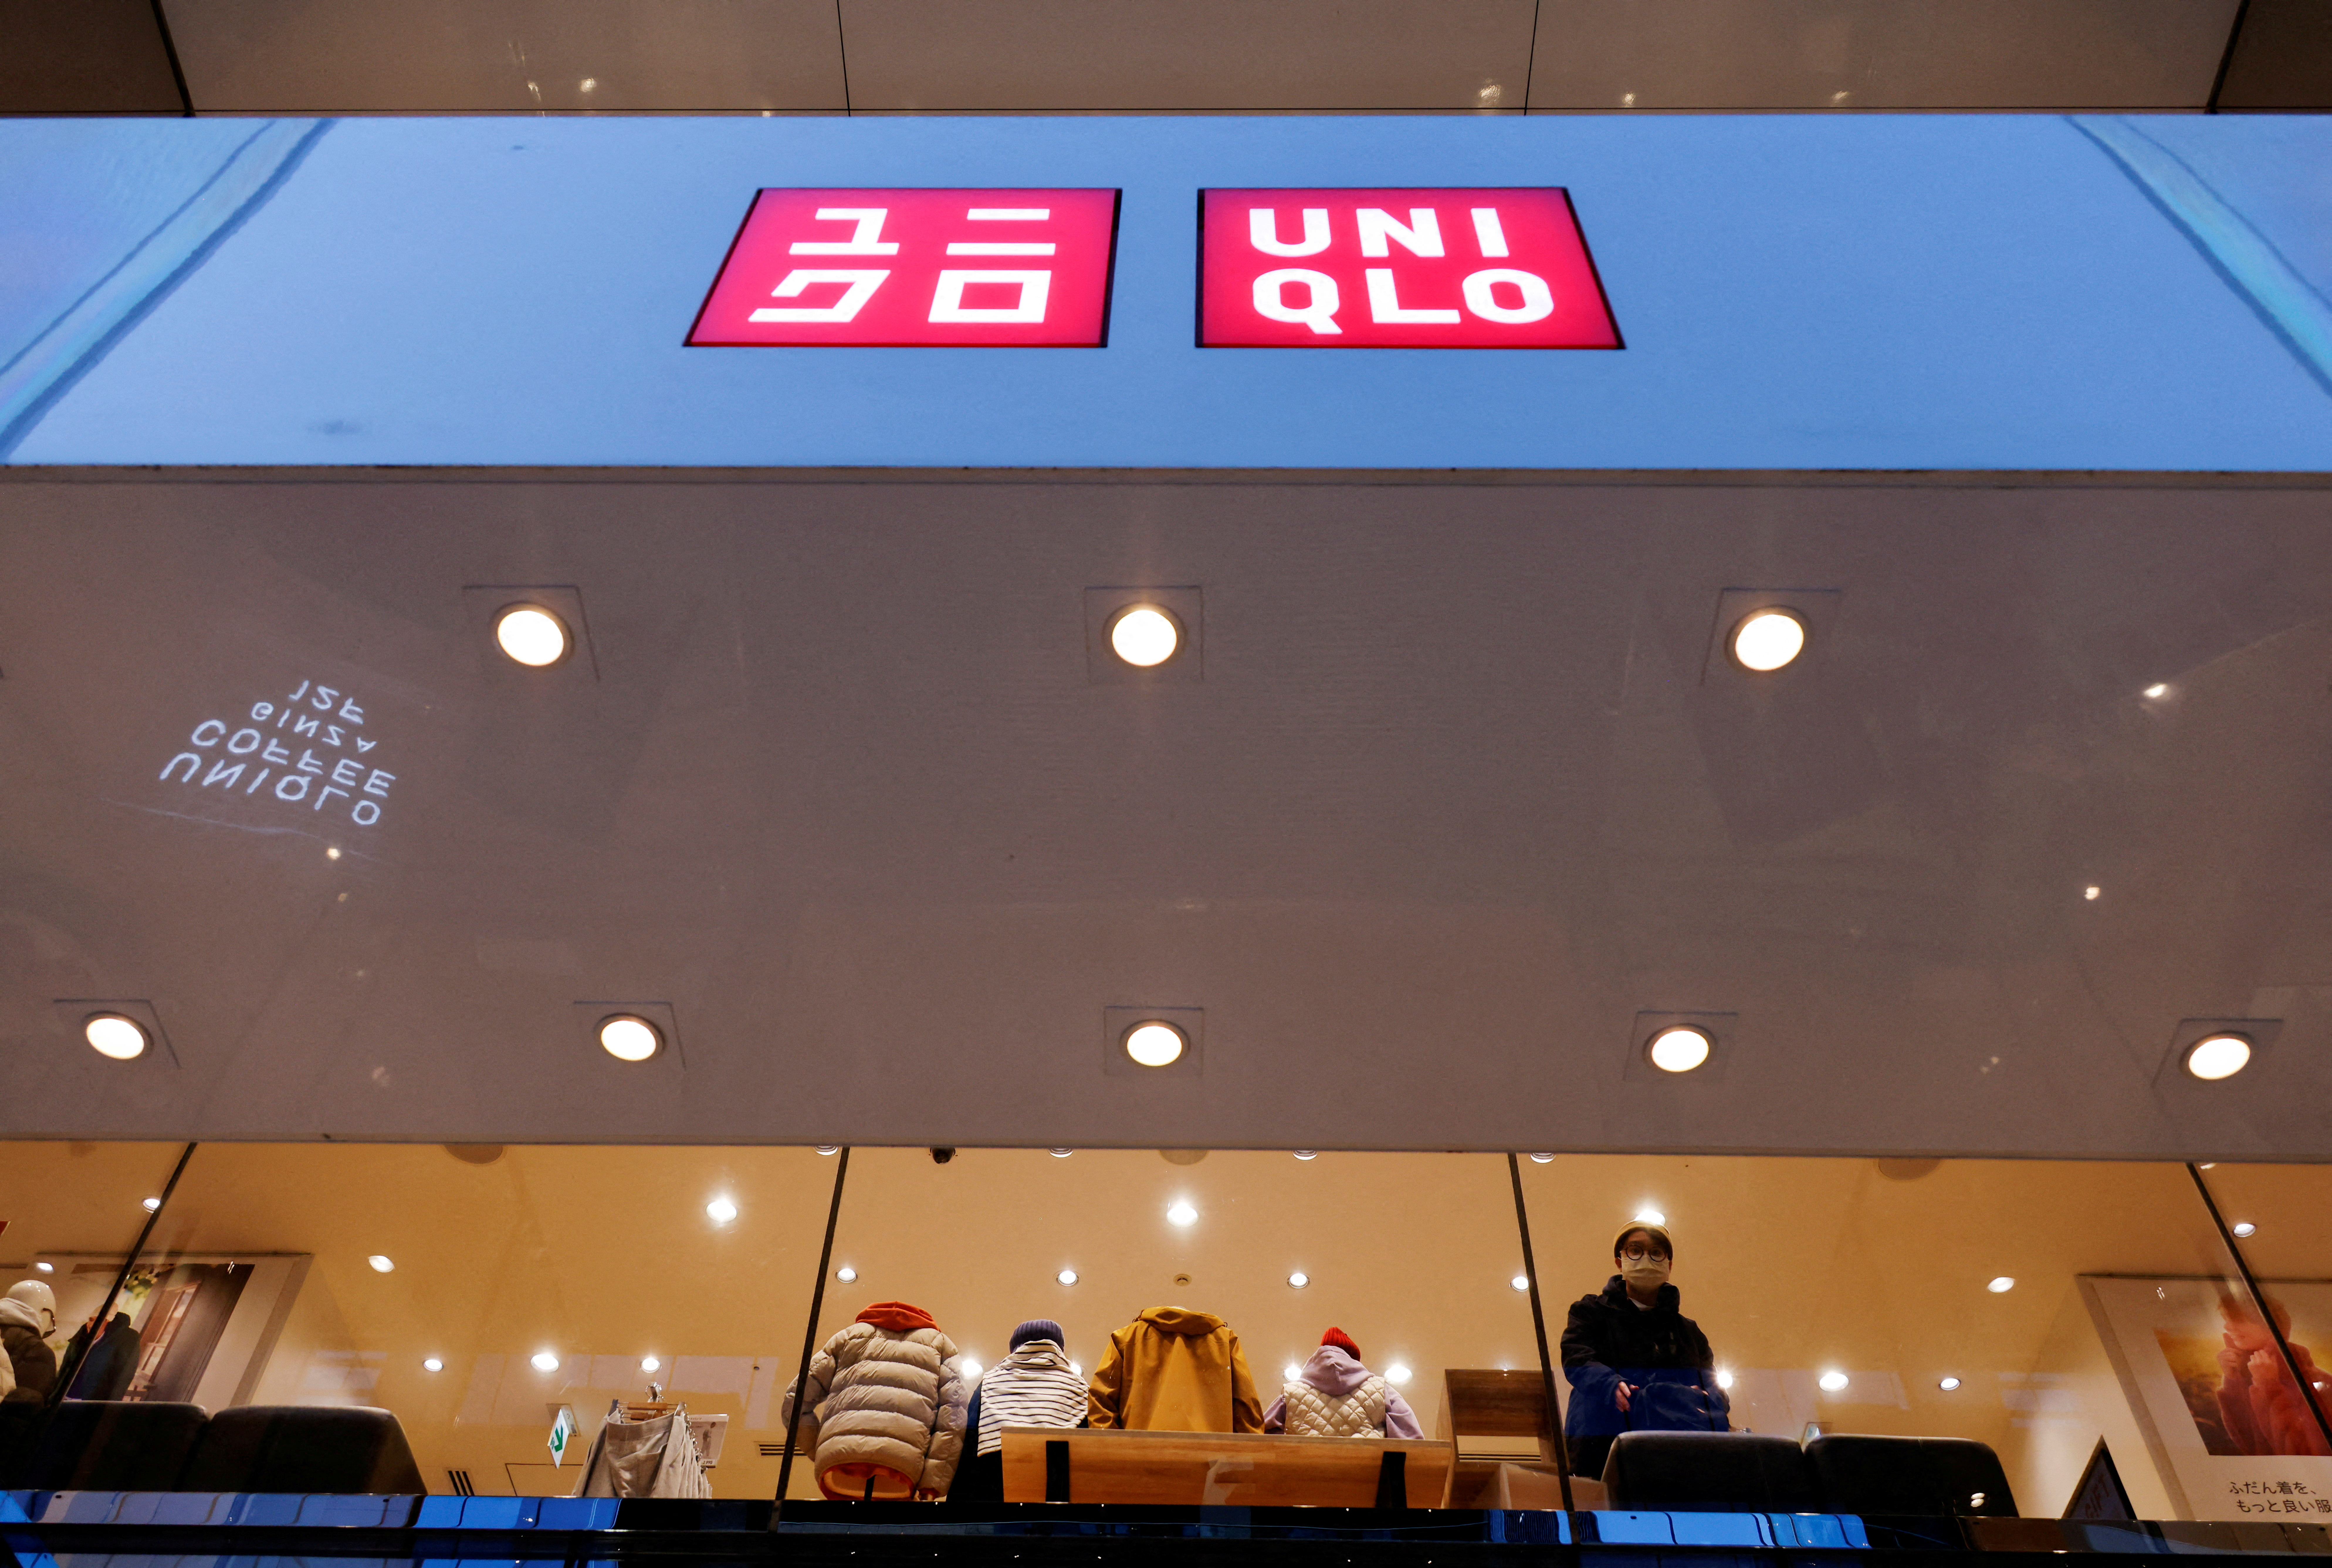 A shopper looks on, inside a Fast Retailing's Uniqlo casual clothing store in Tokyo